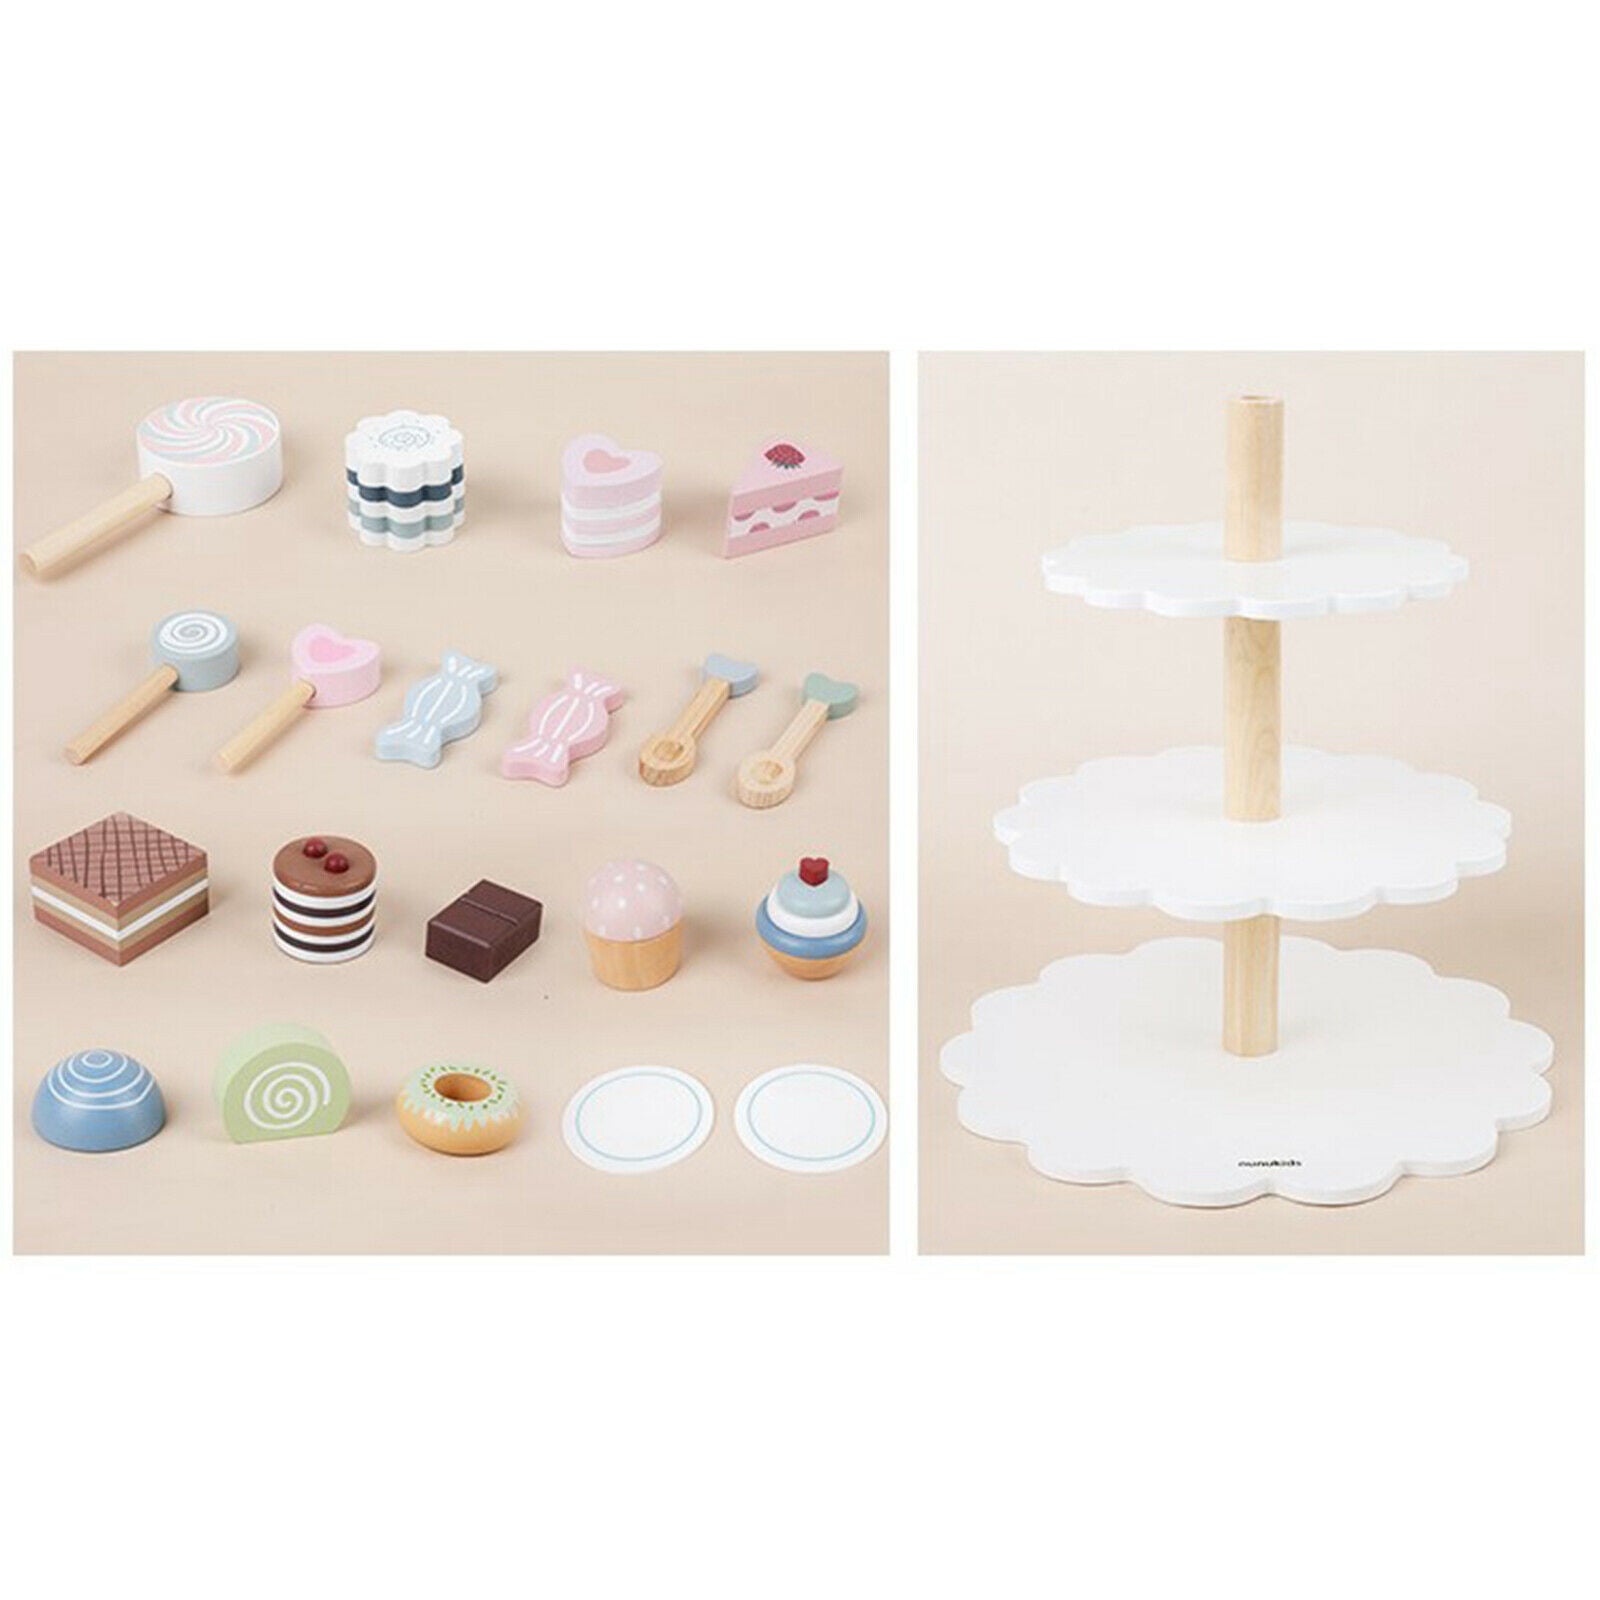 21 PCS Pretend Play Food Set Pretend Play Desserts Cake and Donuts Food Toys -